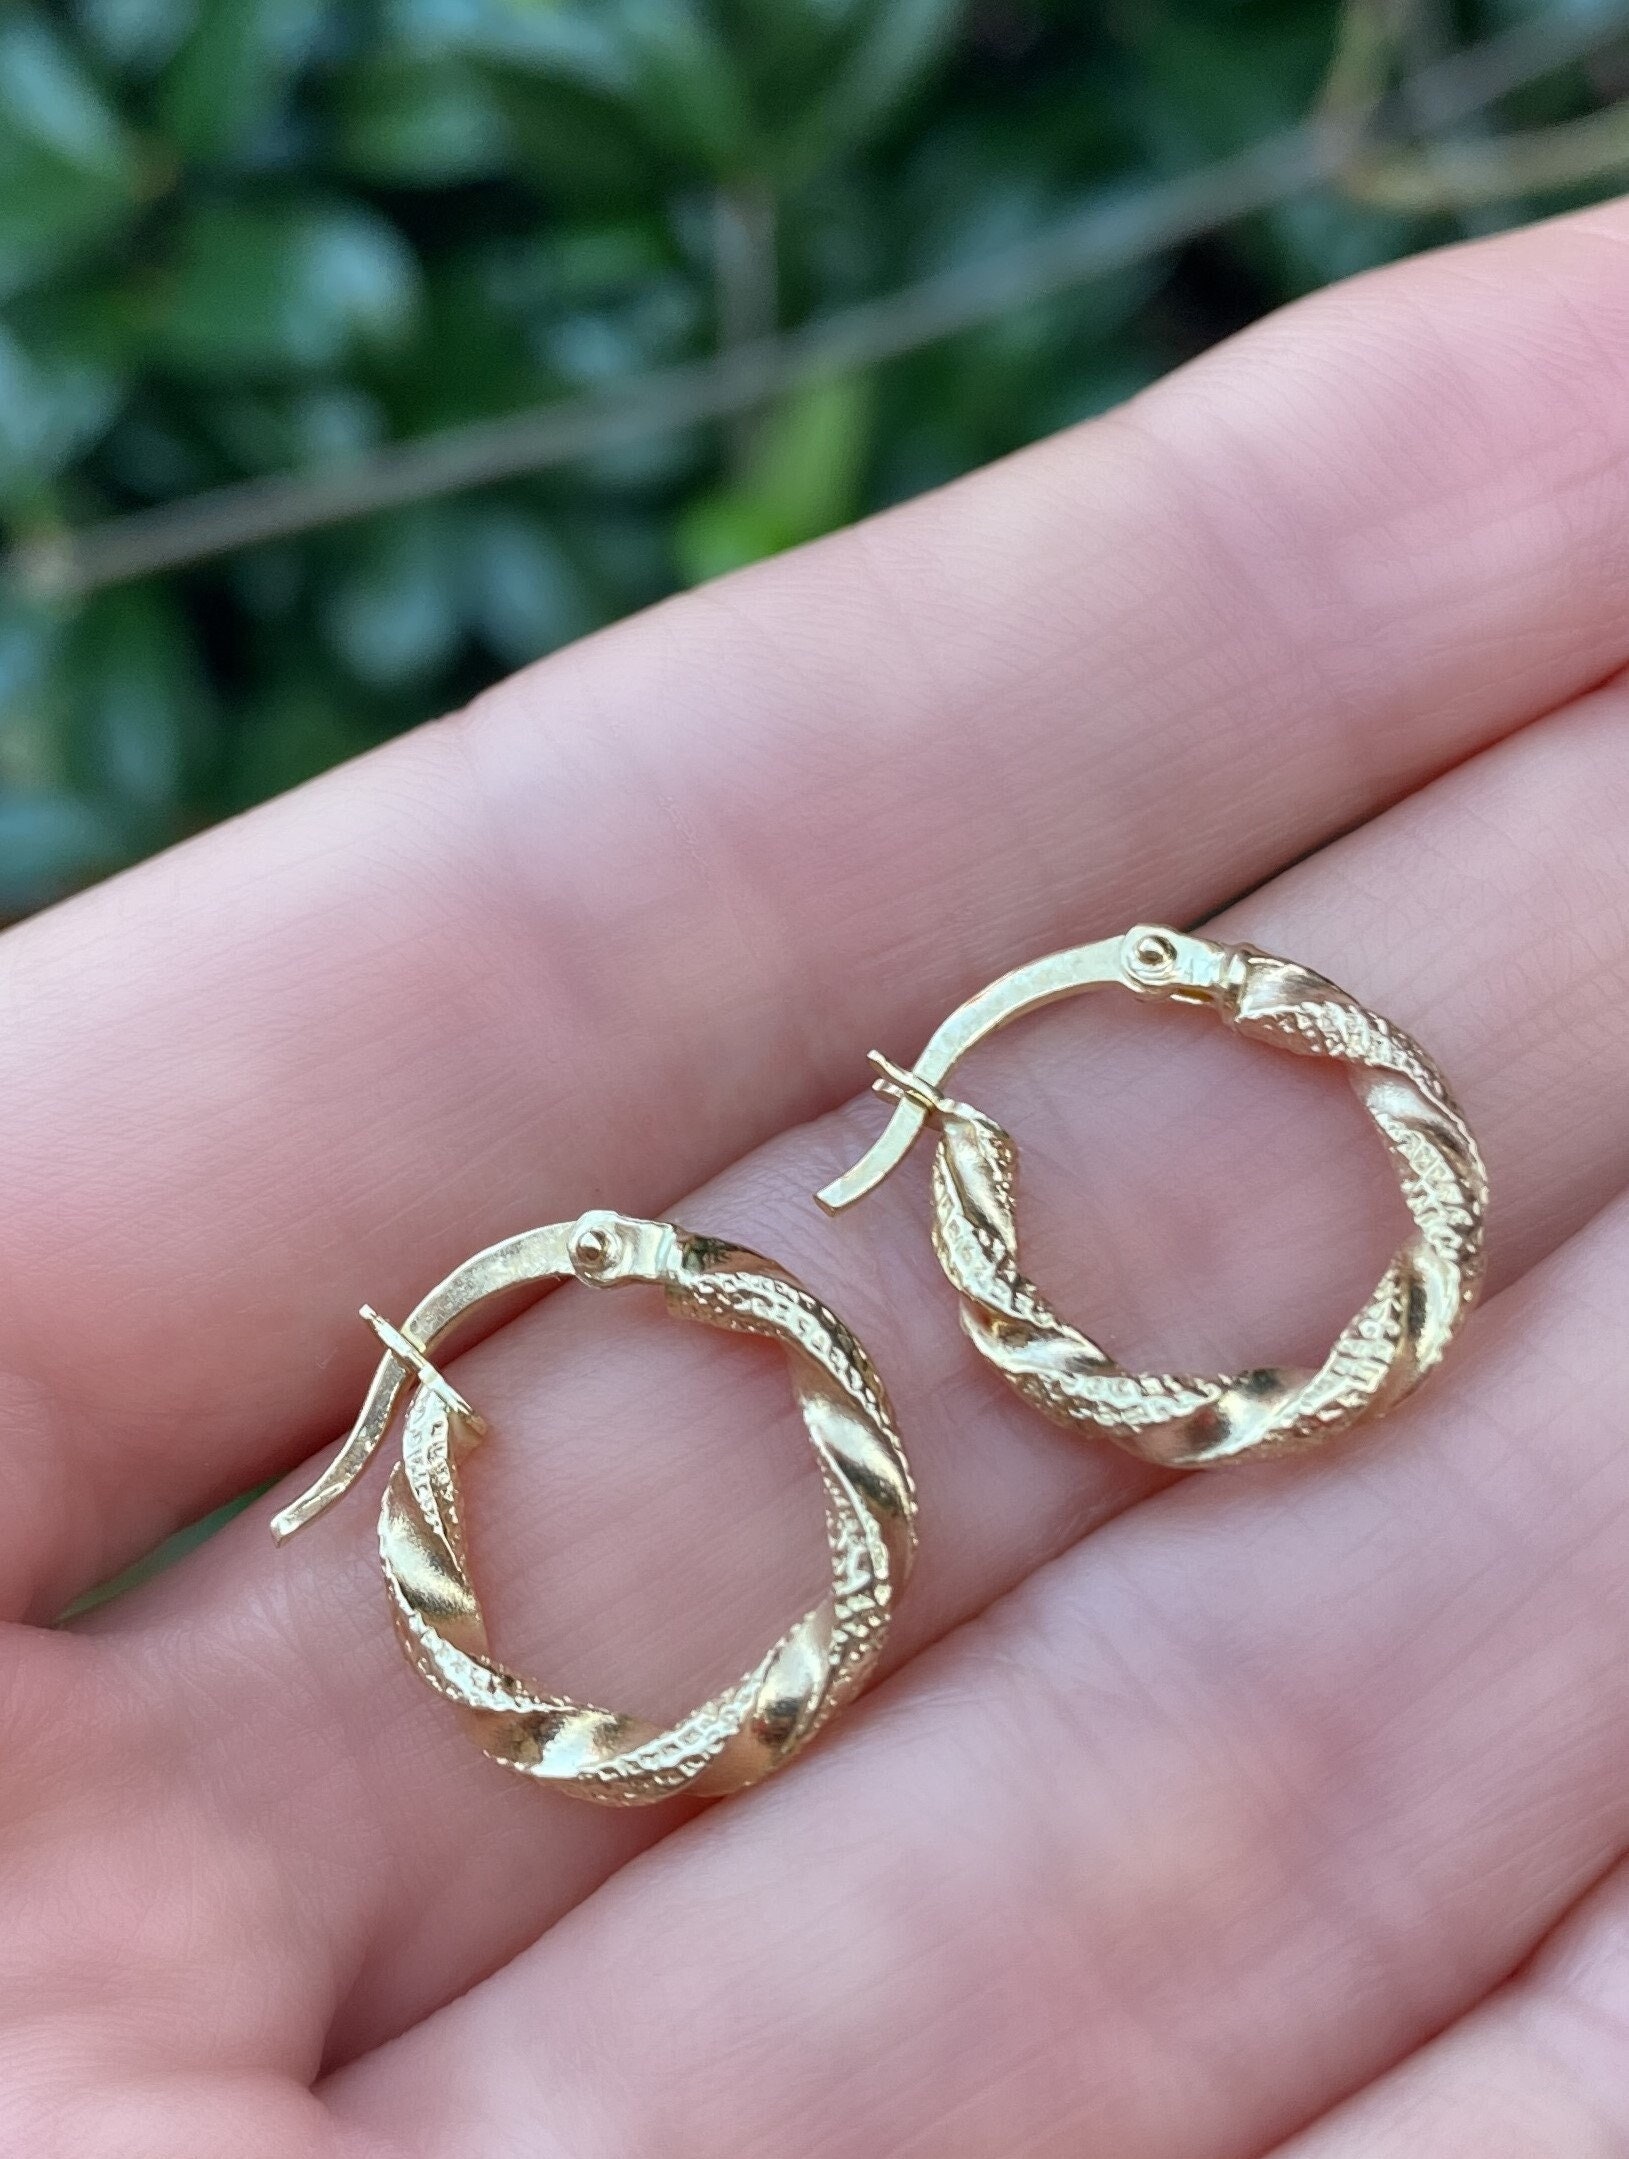 Solid Gold Square Hoops (PAIR) Medium - 14K Gold Pipe Hoop earrings- Tube  hoops- Pipe- 14 ct Solid Gold hoop earrings- Christmas Gift